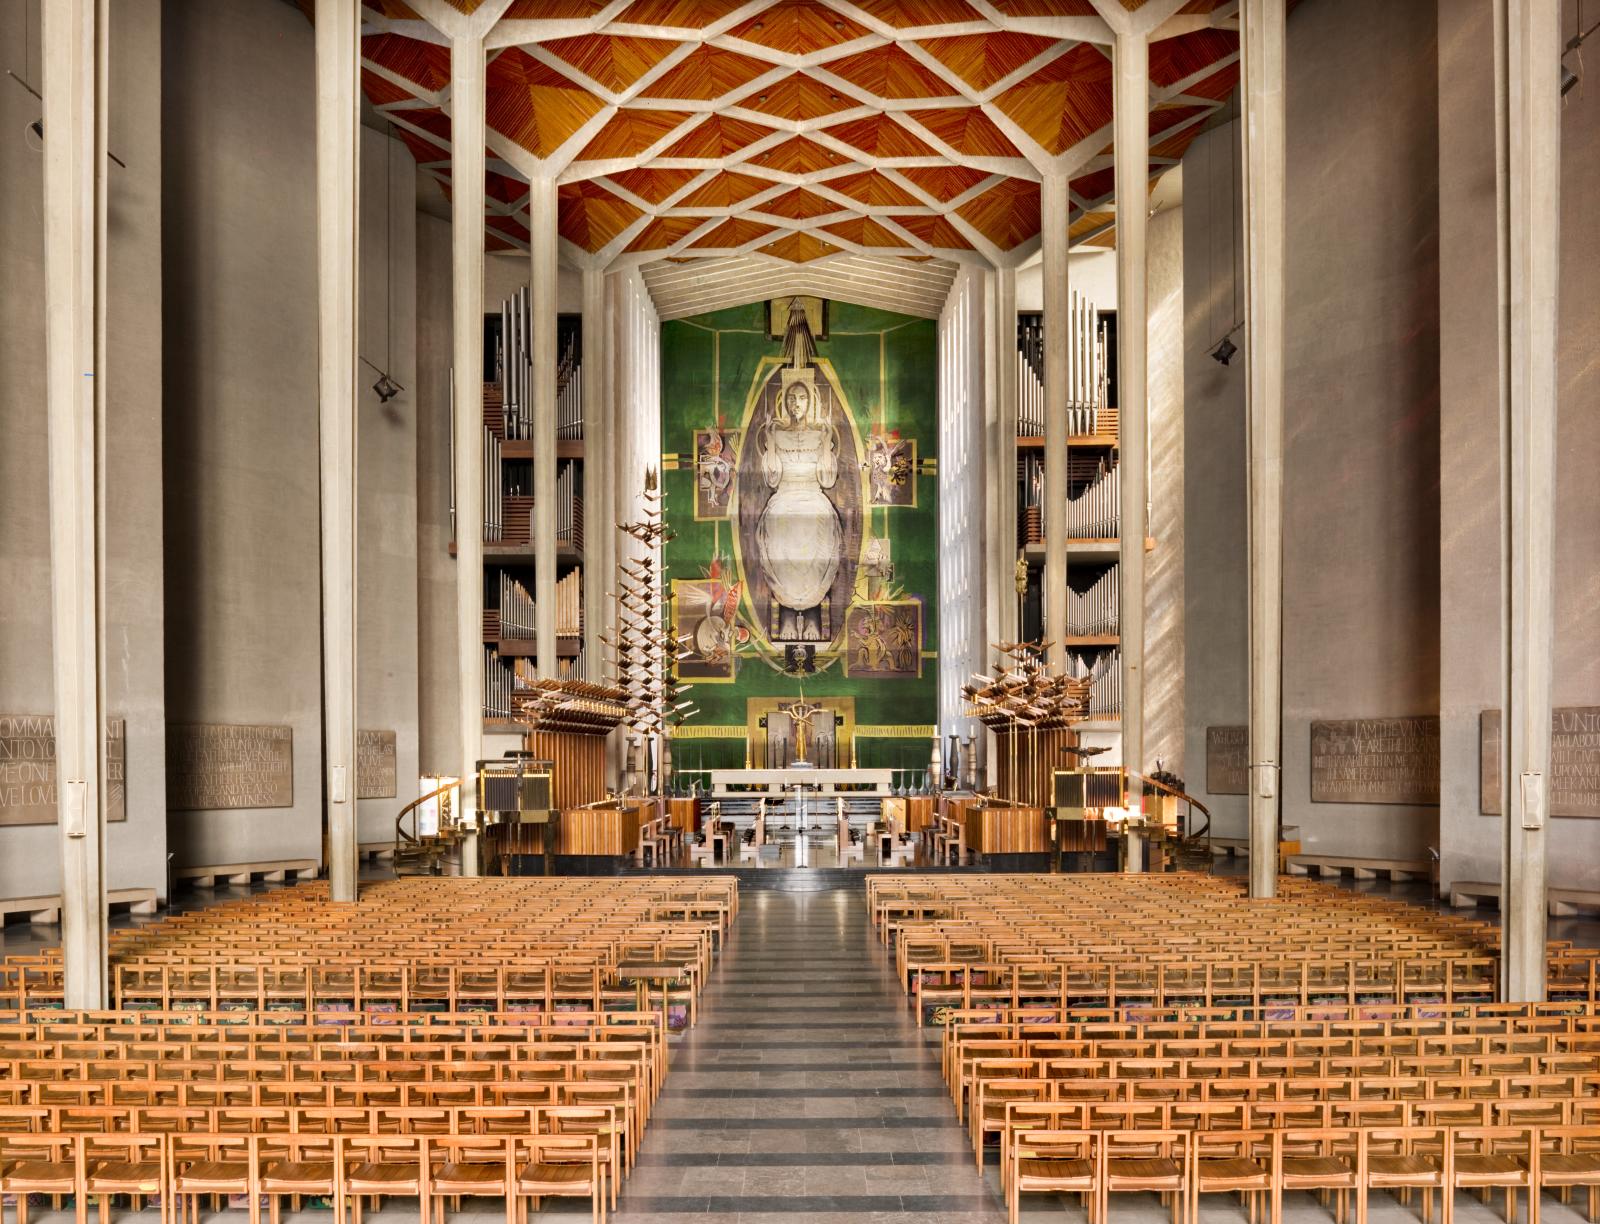 Interior of chancel and nave of Coventry Cathedral, view from north.